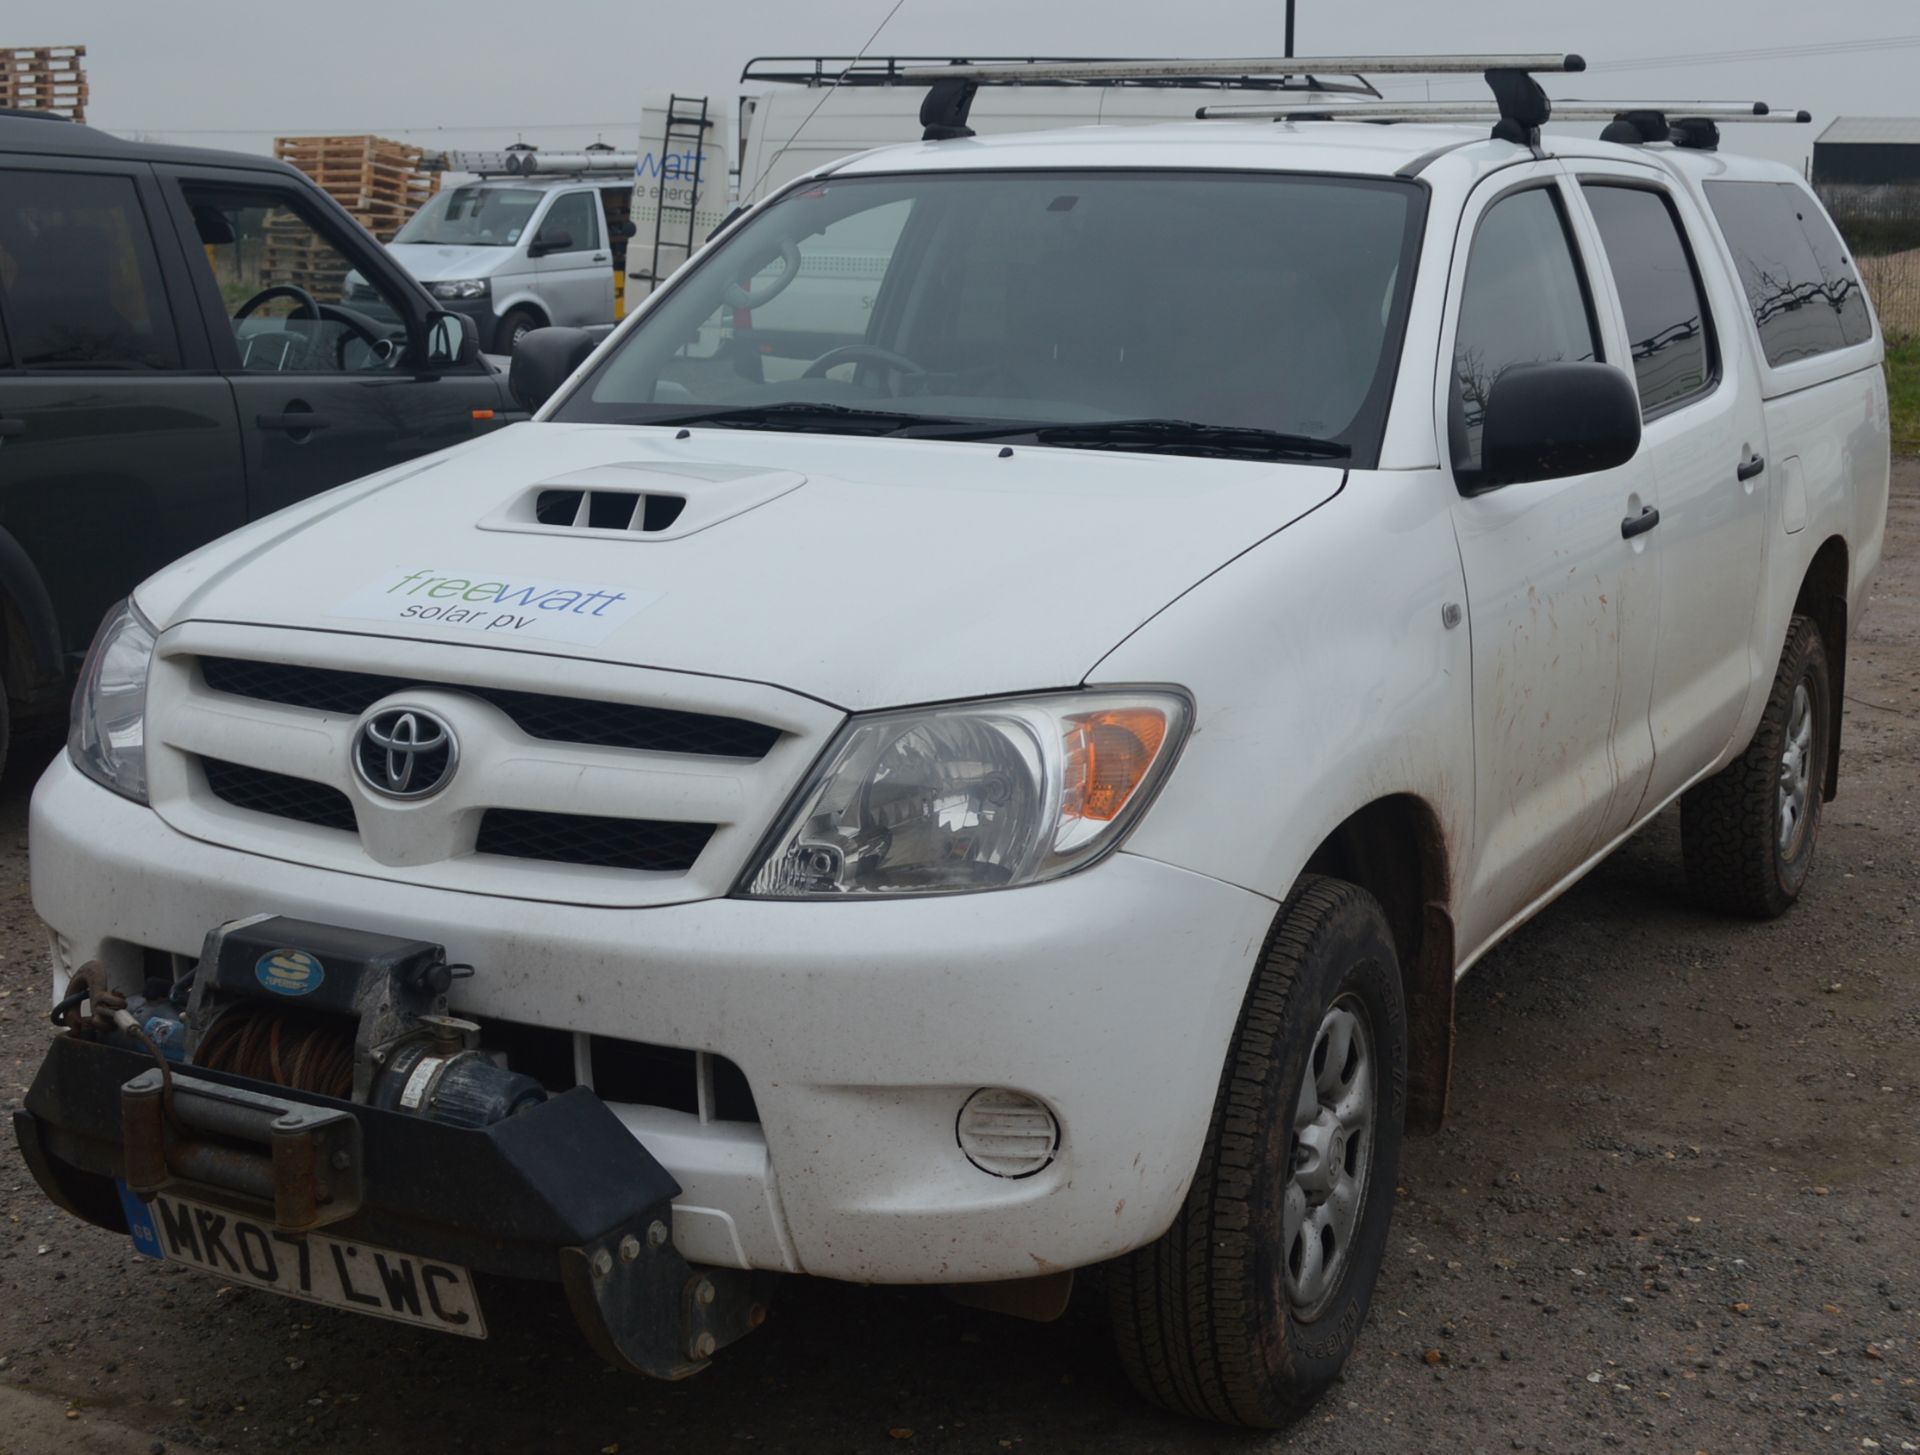 Toyota Hilux D-4D 4x4 Double Cab Pick Up Truck with Truck Top Cover Registration No: MK07 LWC - Image 2 of 9